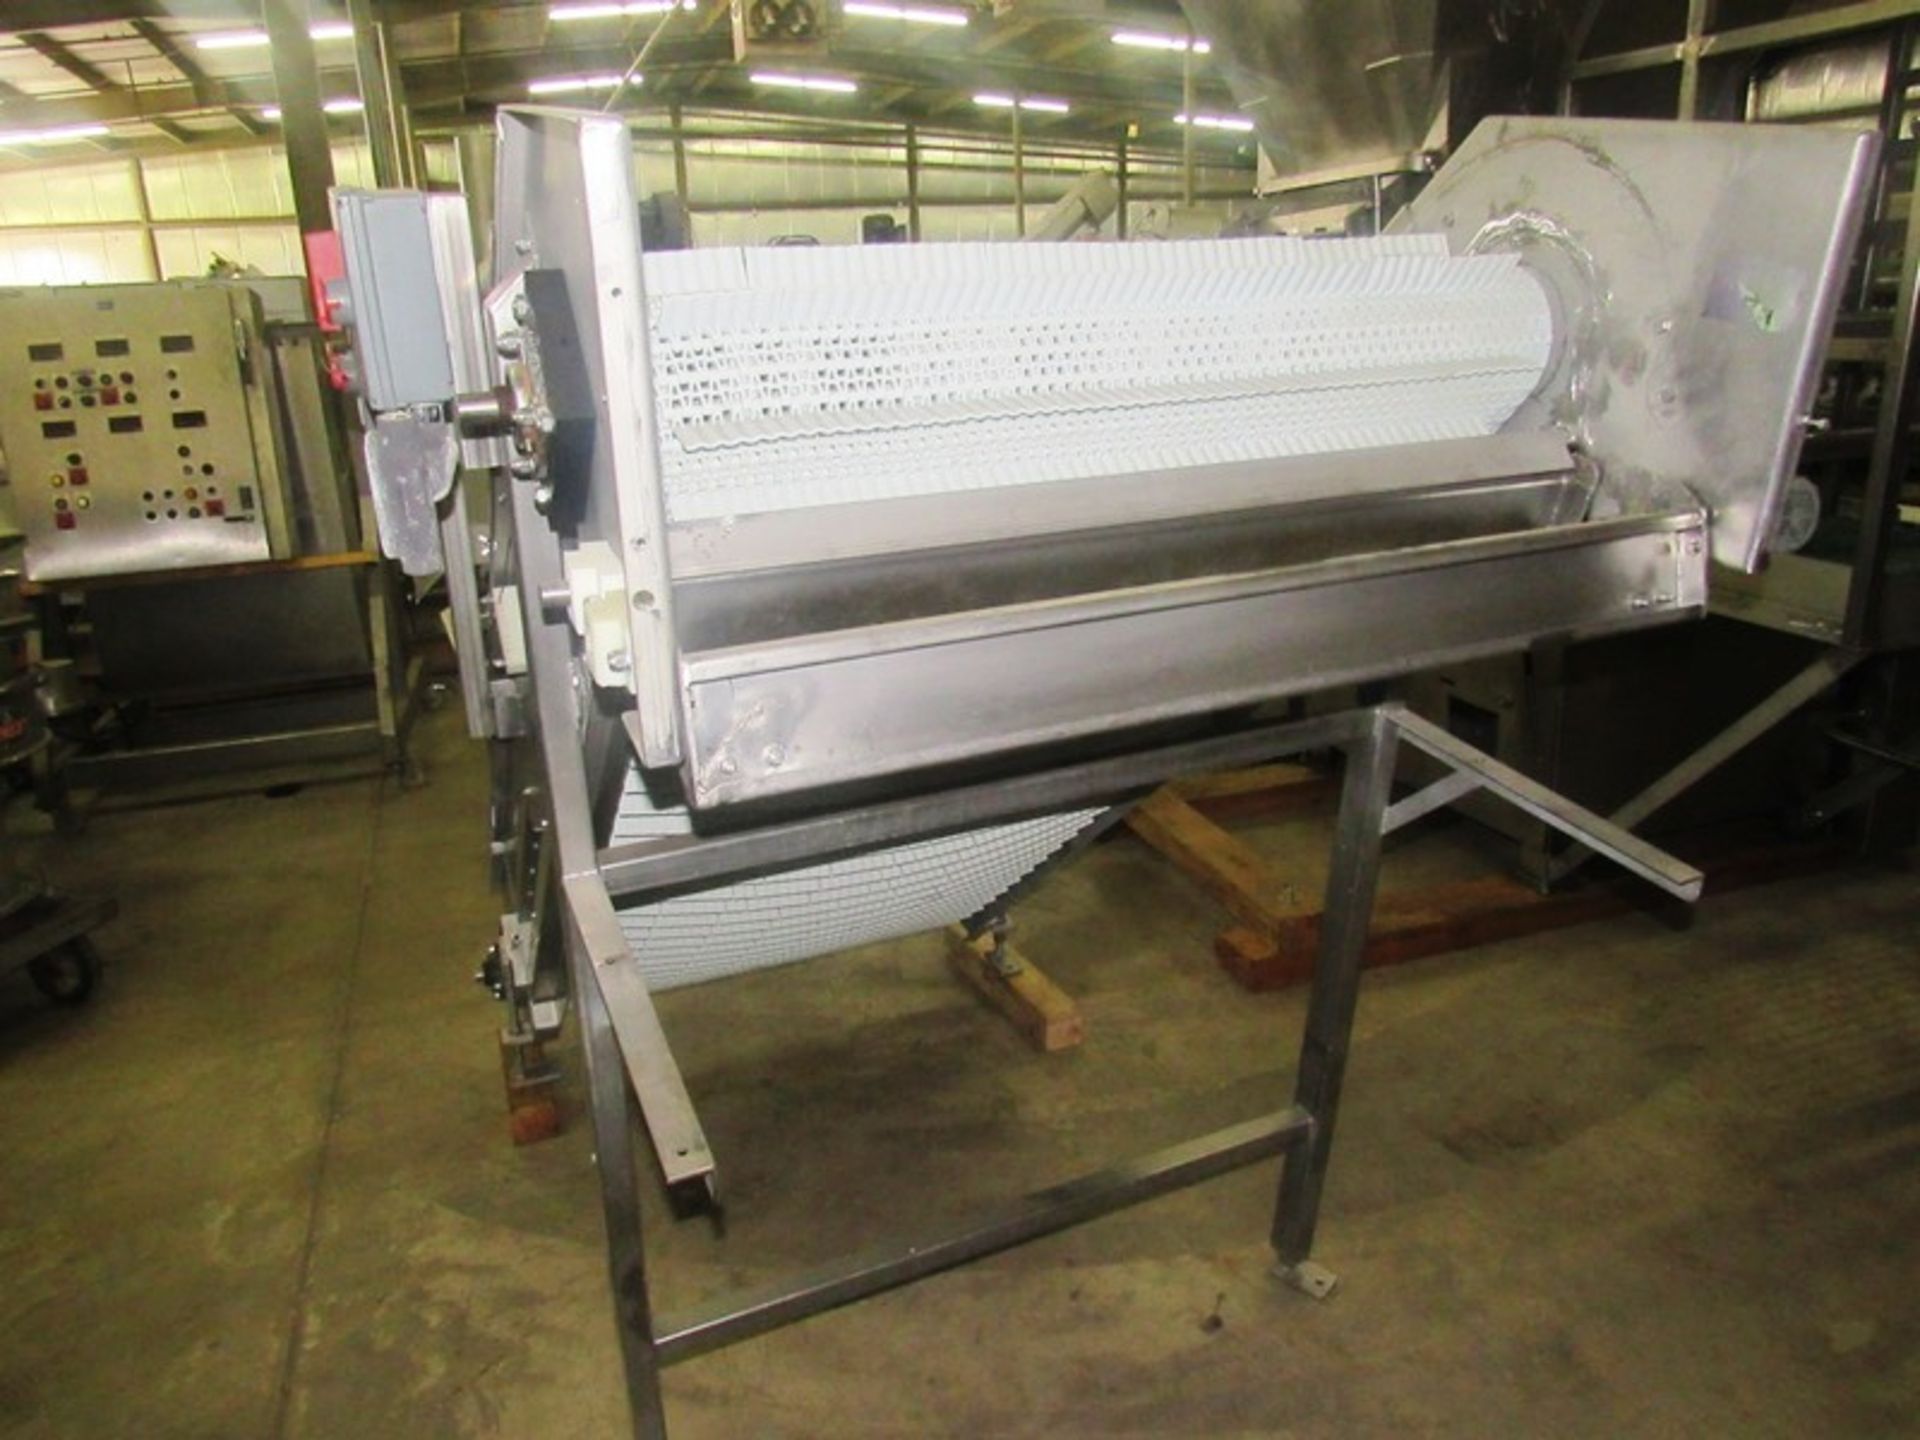 Stainless Steel Incline Conveyor, 39" W X 8' L flighted plastic belt, 1 1/2" high, flights spaced 3" - Image 2 of 6